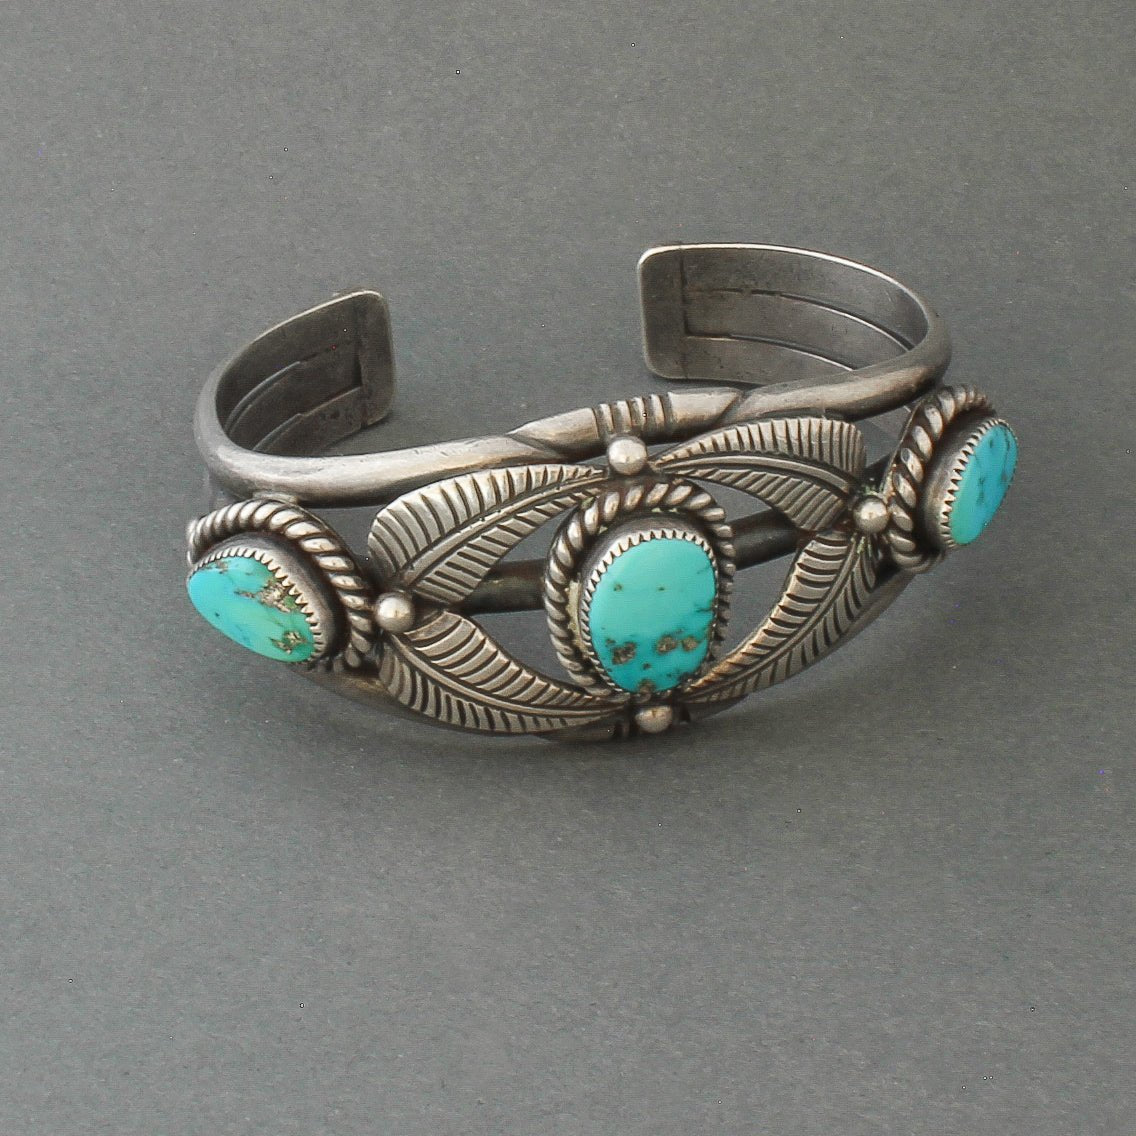 Vintage Bracelet By McKee Platero Of Turquoise and Silver - Turquoise & Tufa